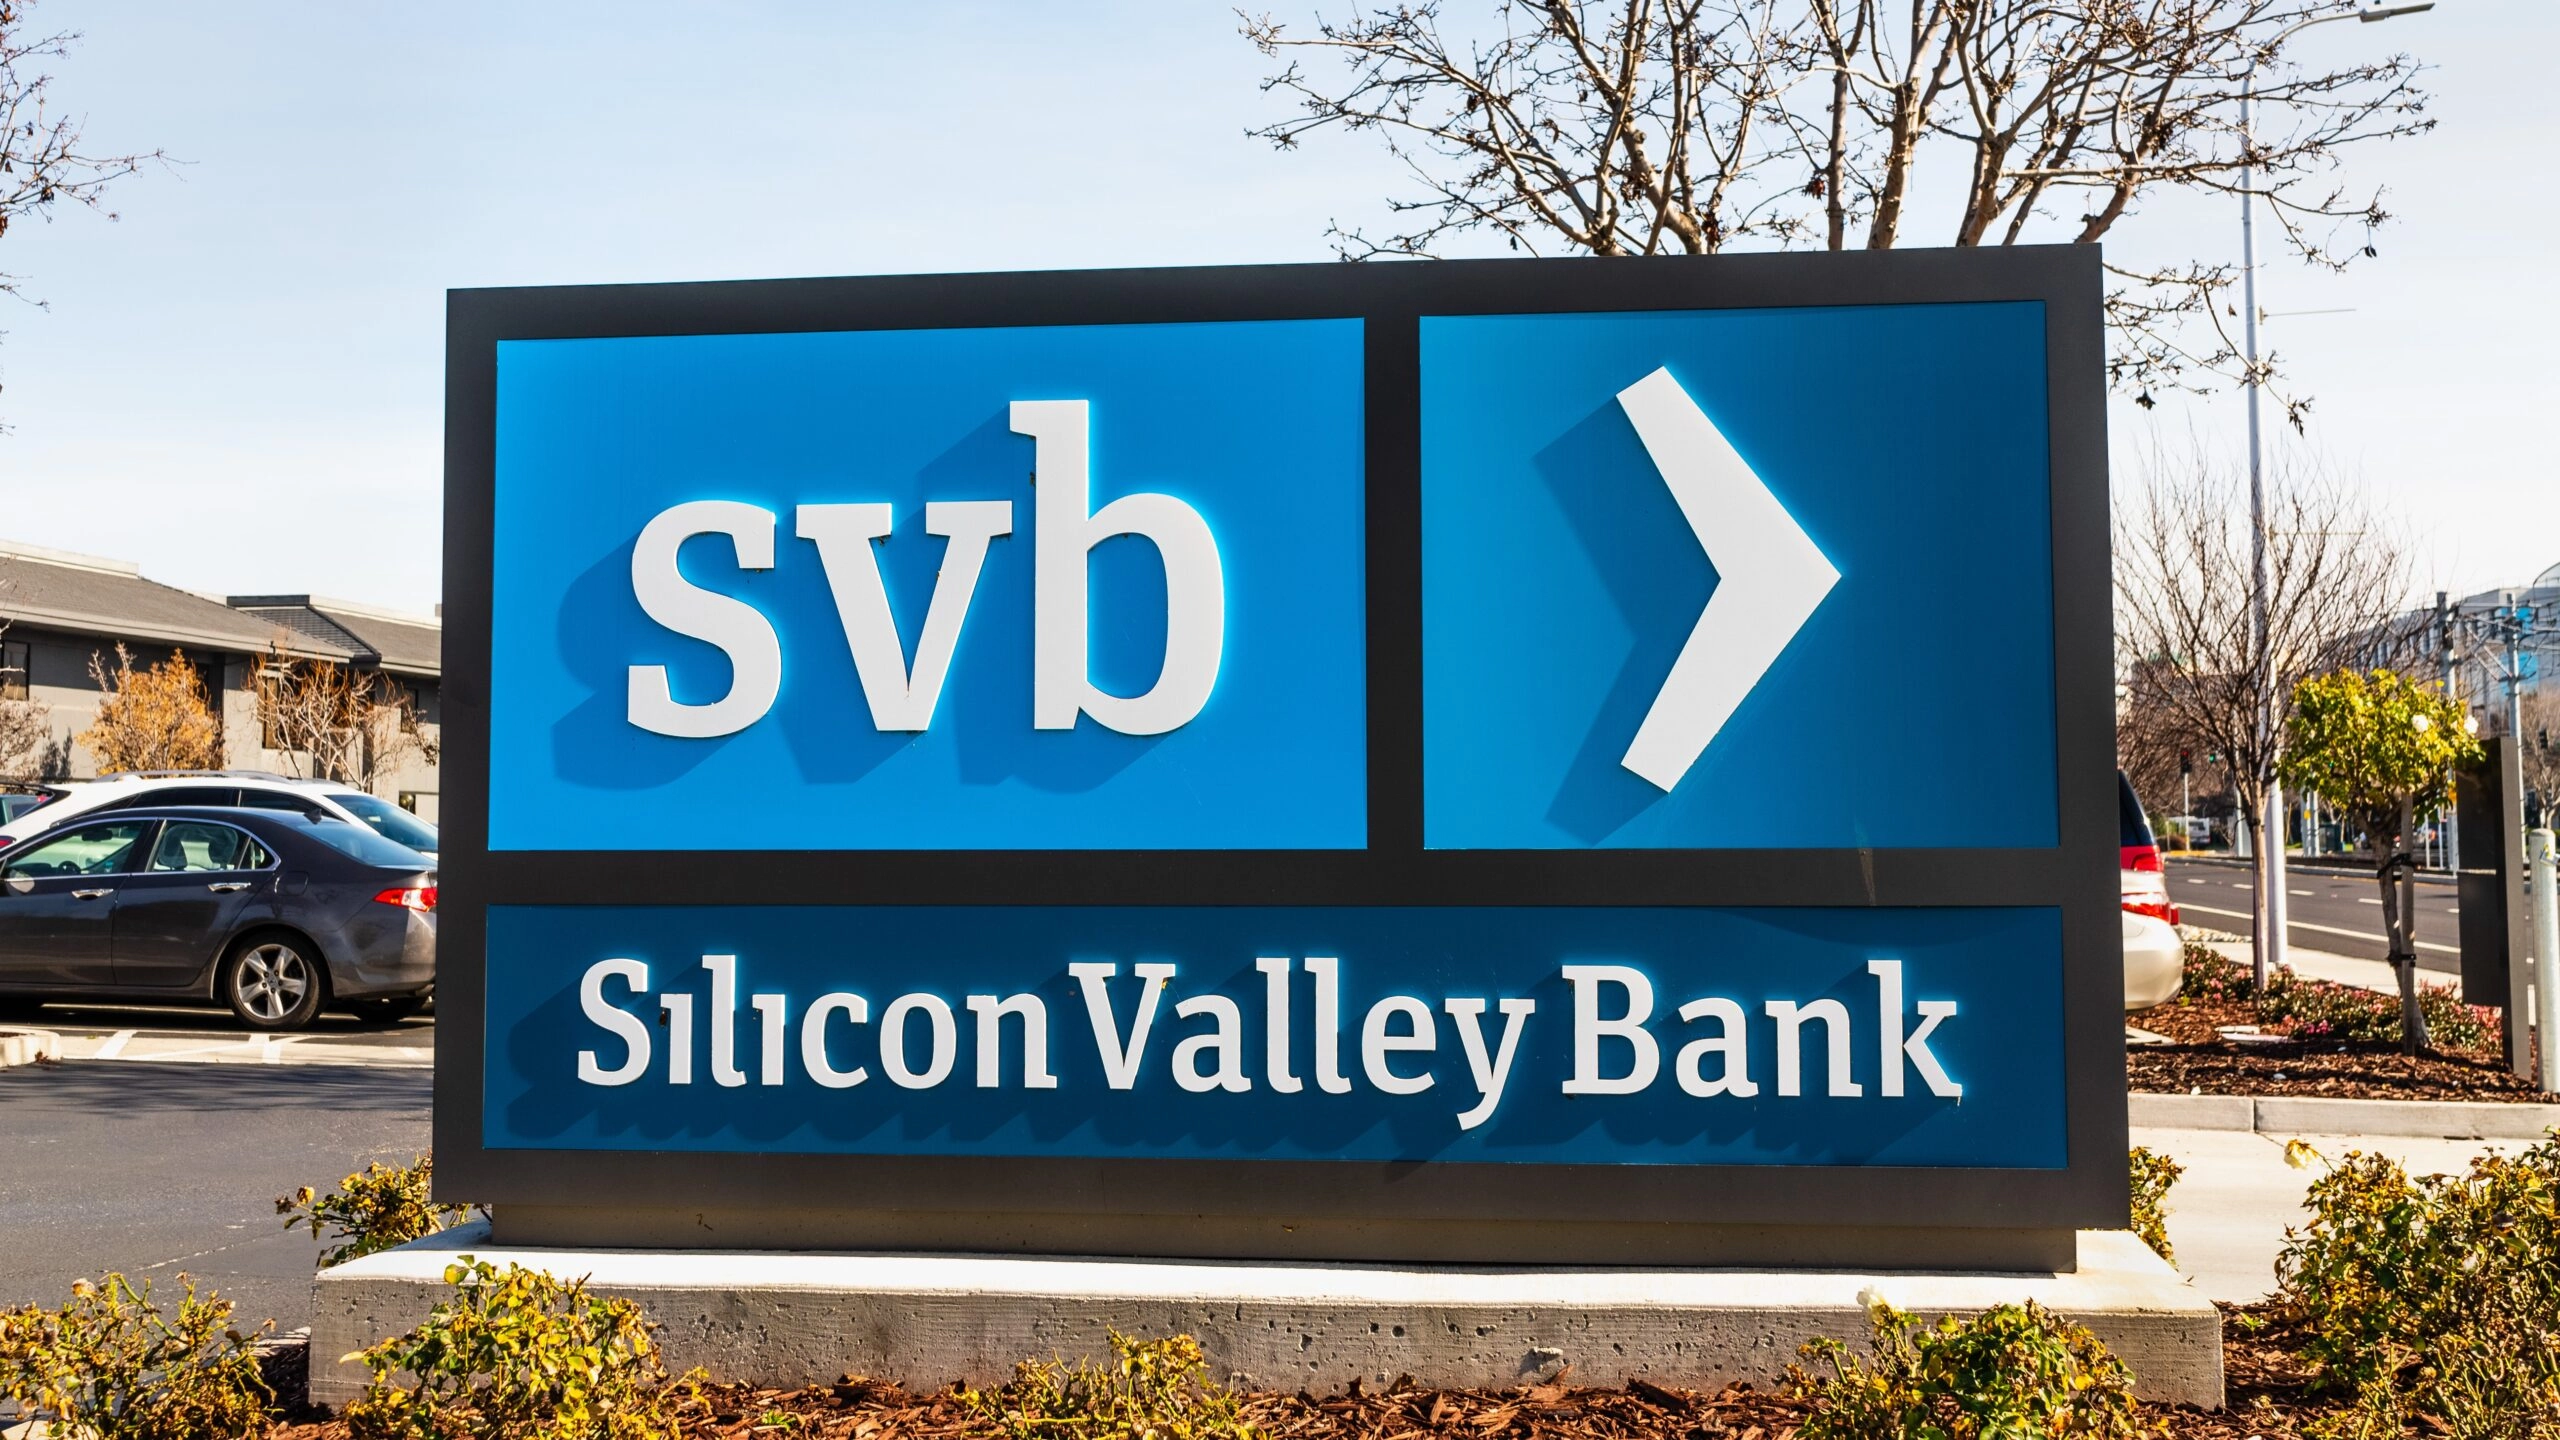 What Happened to Silicon Valley Bank?